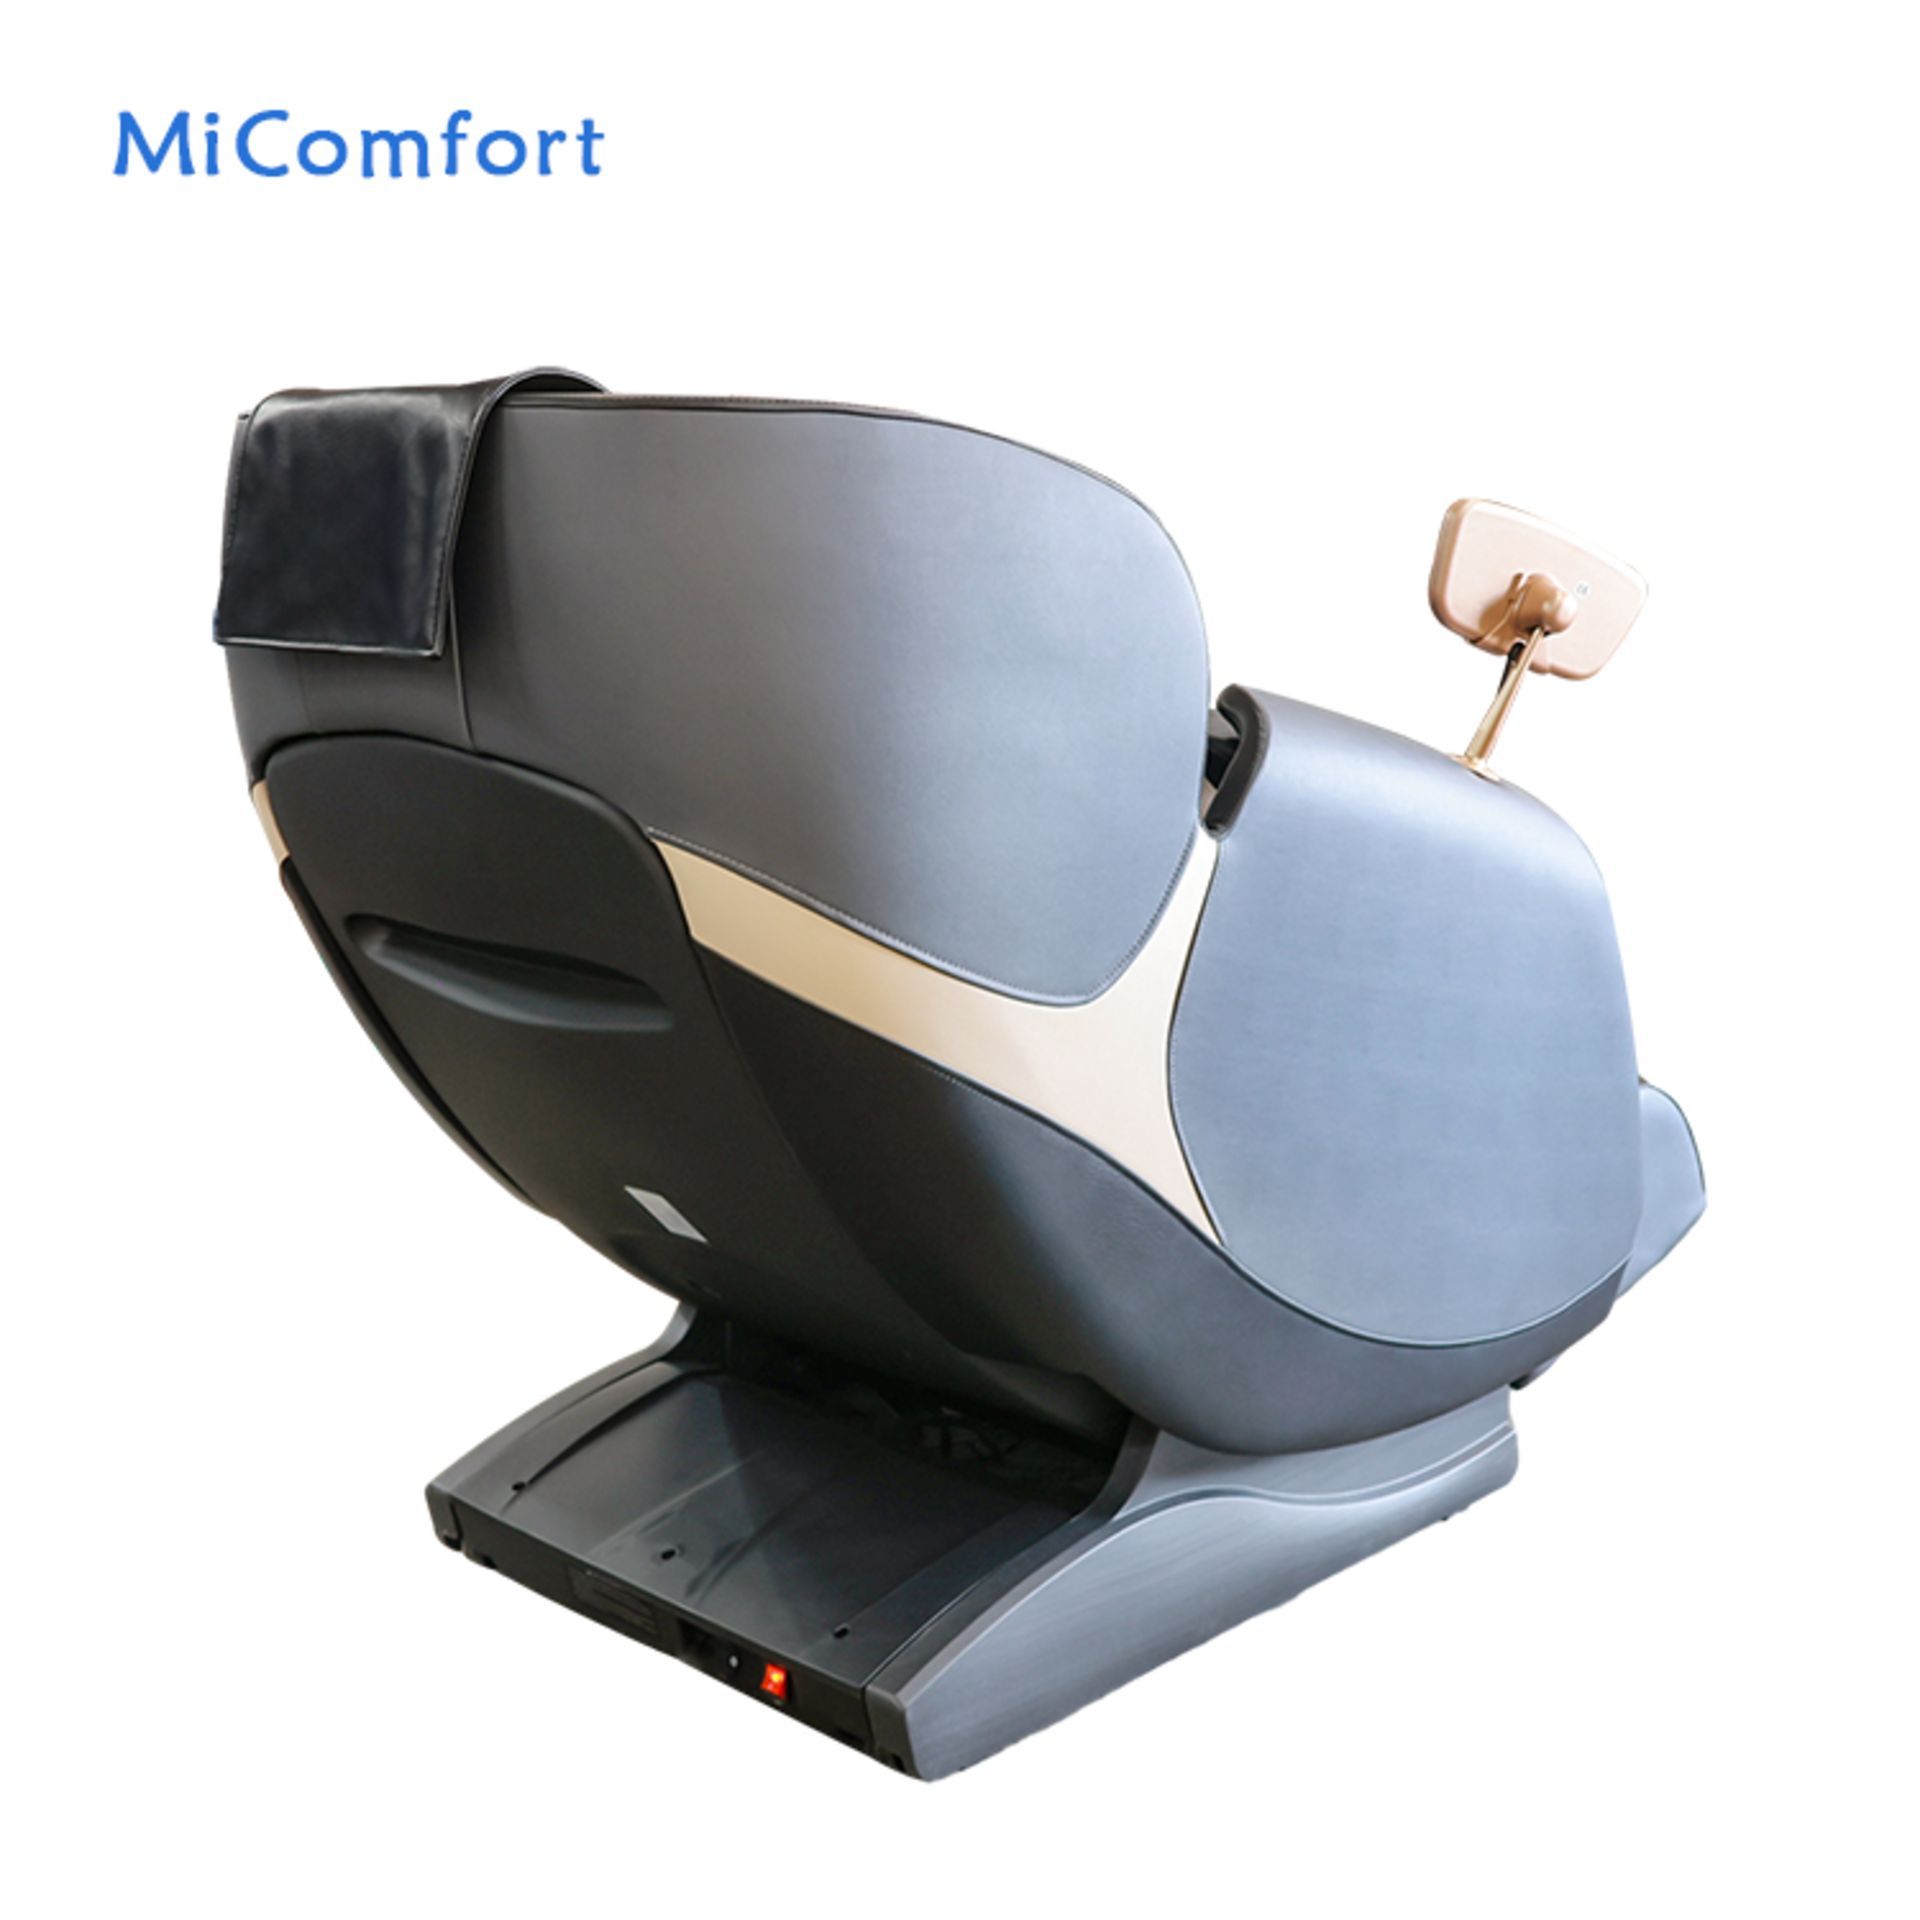 Brand New in Box Orchid Blue/Black MiComfort Full Body Massage Chair RRP £2199 *NO VAT* - Image 13 of 14